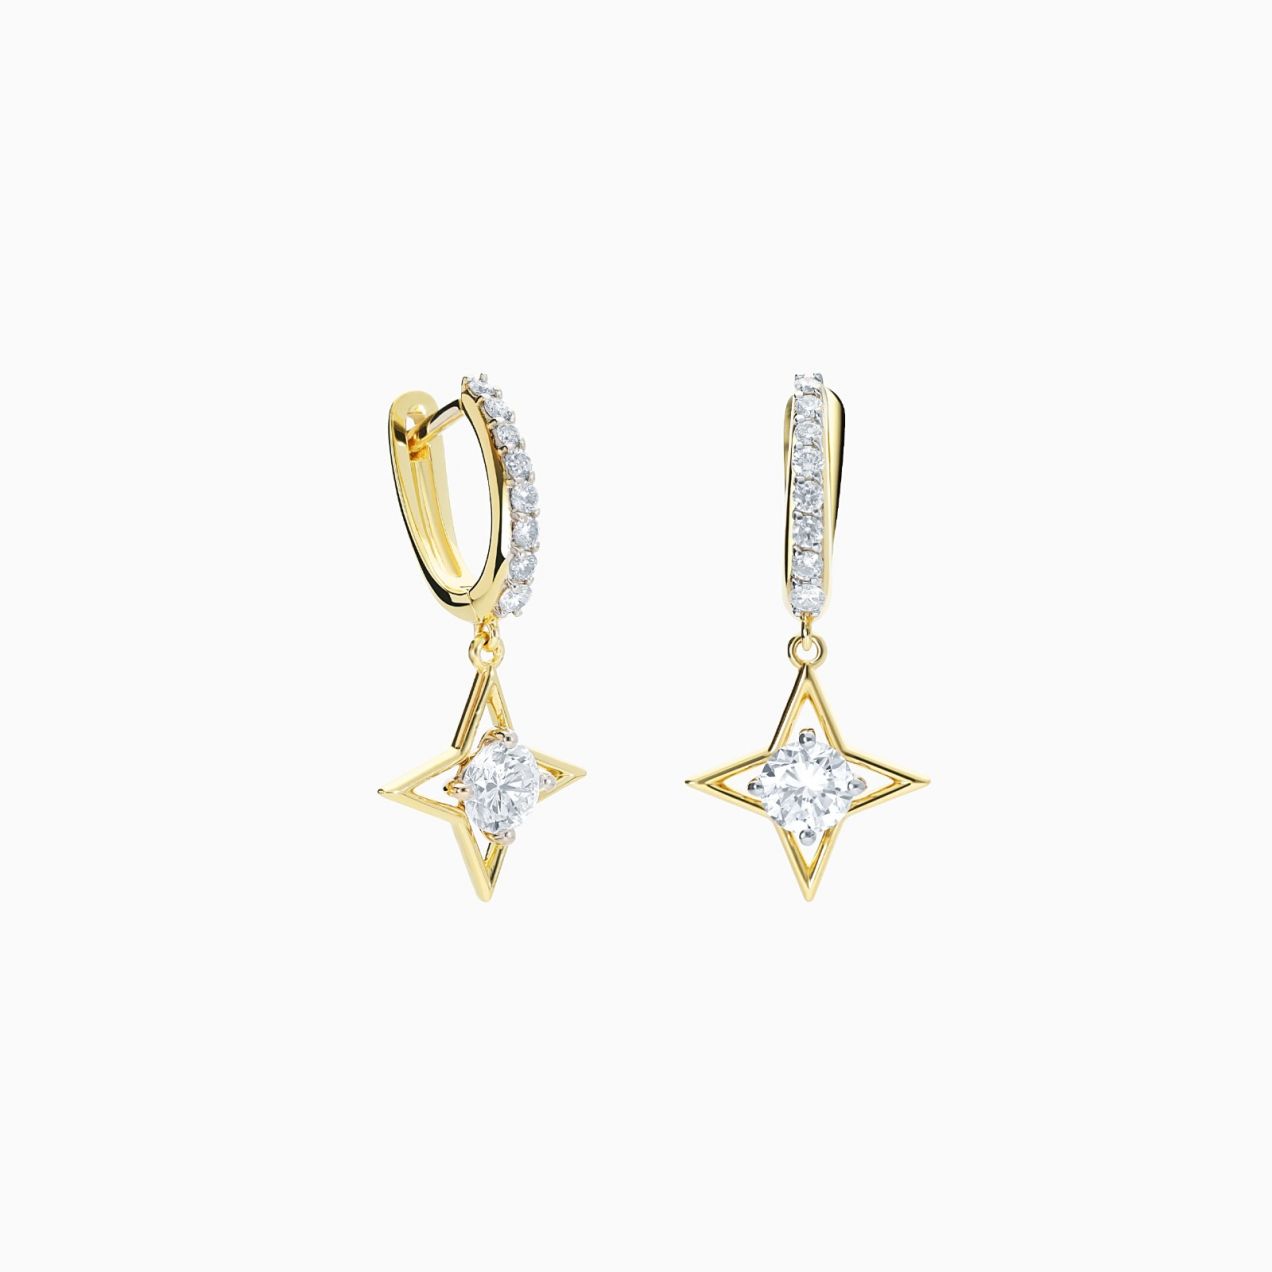 Star earrings in yellow gold with diamonds and a central diamond